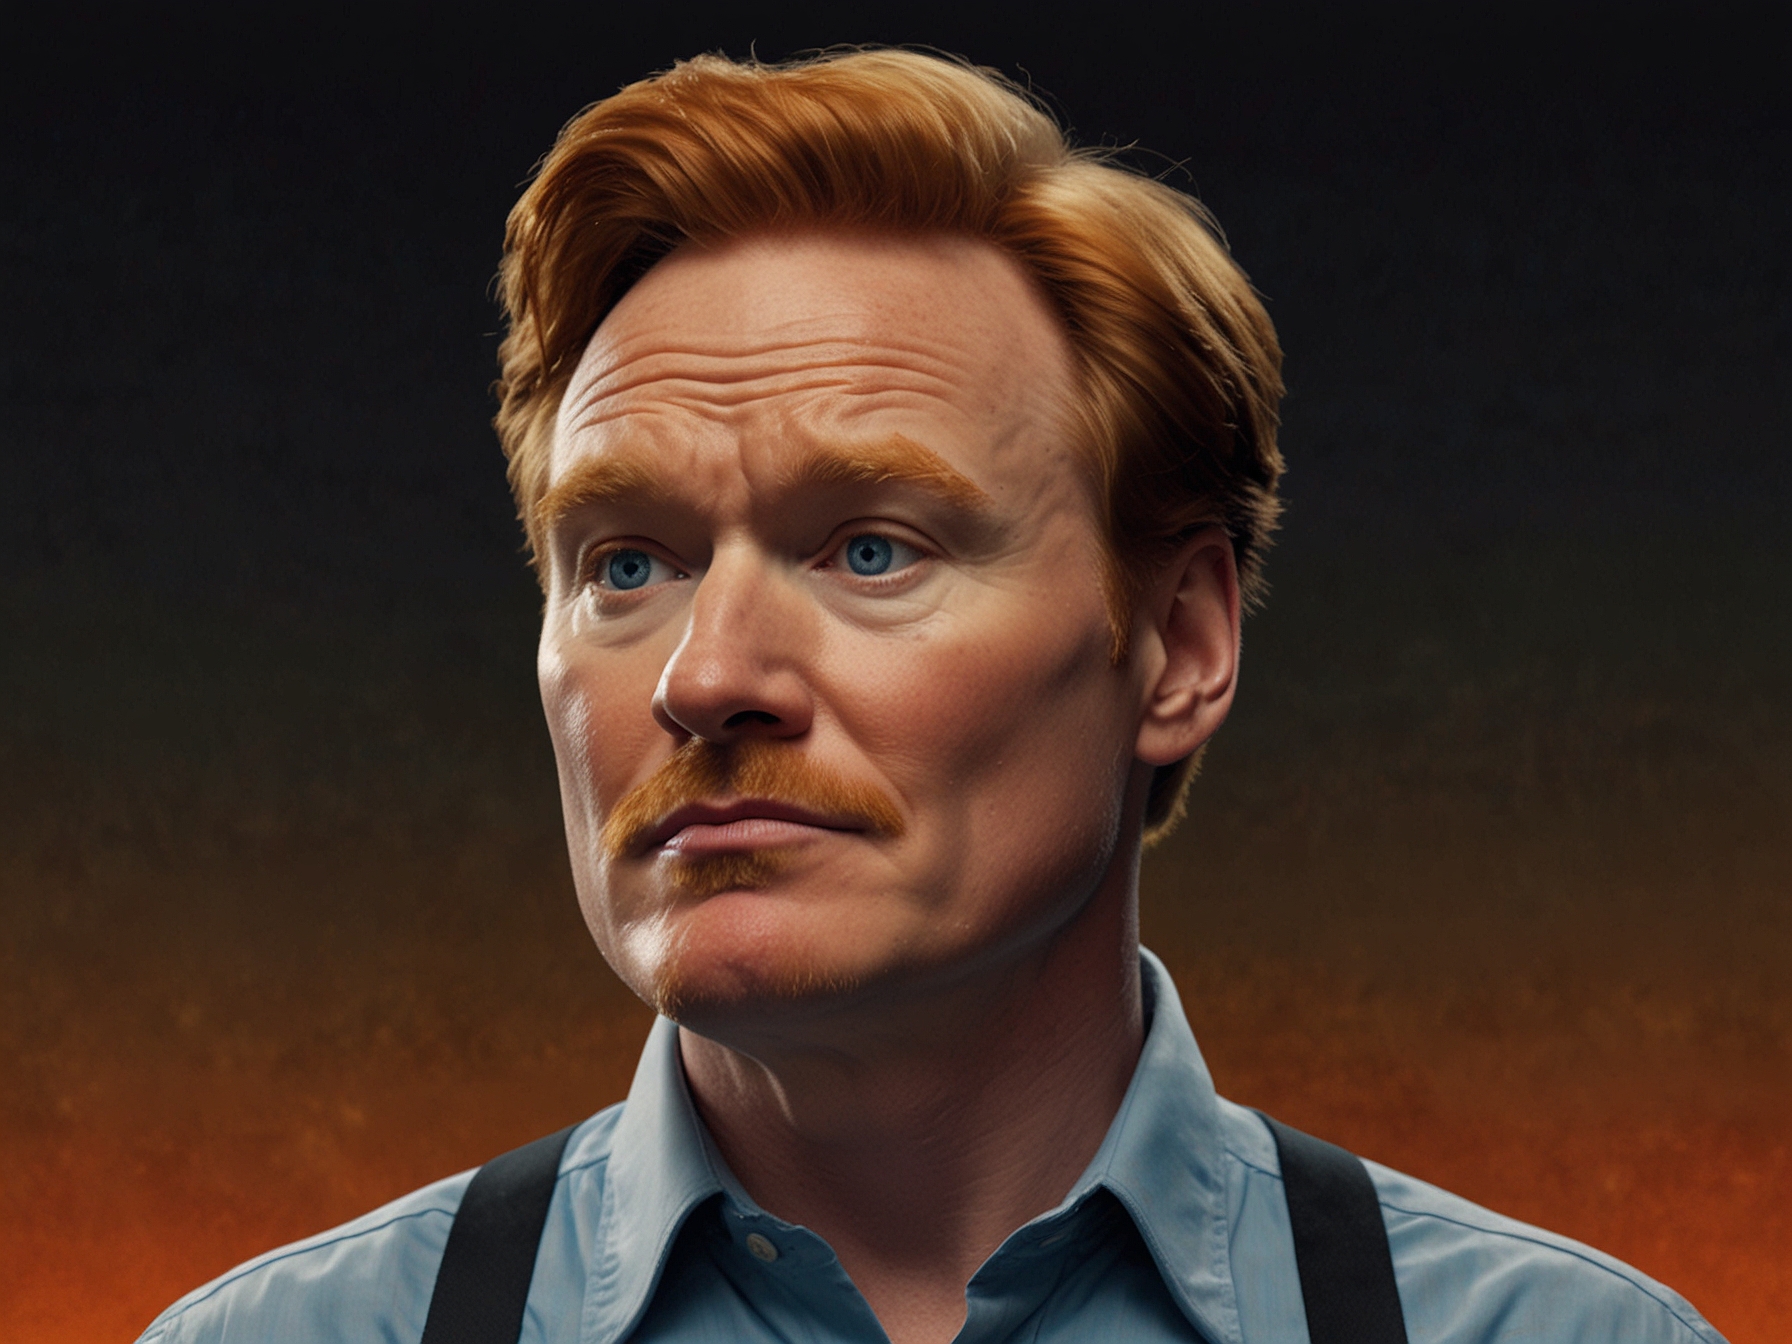 A close-up shot of Conan O'Brien making a funny, pained facial expression as he experiences the intense heat of the 'wings of death' on 'Hot Ones'.